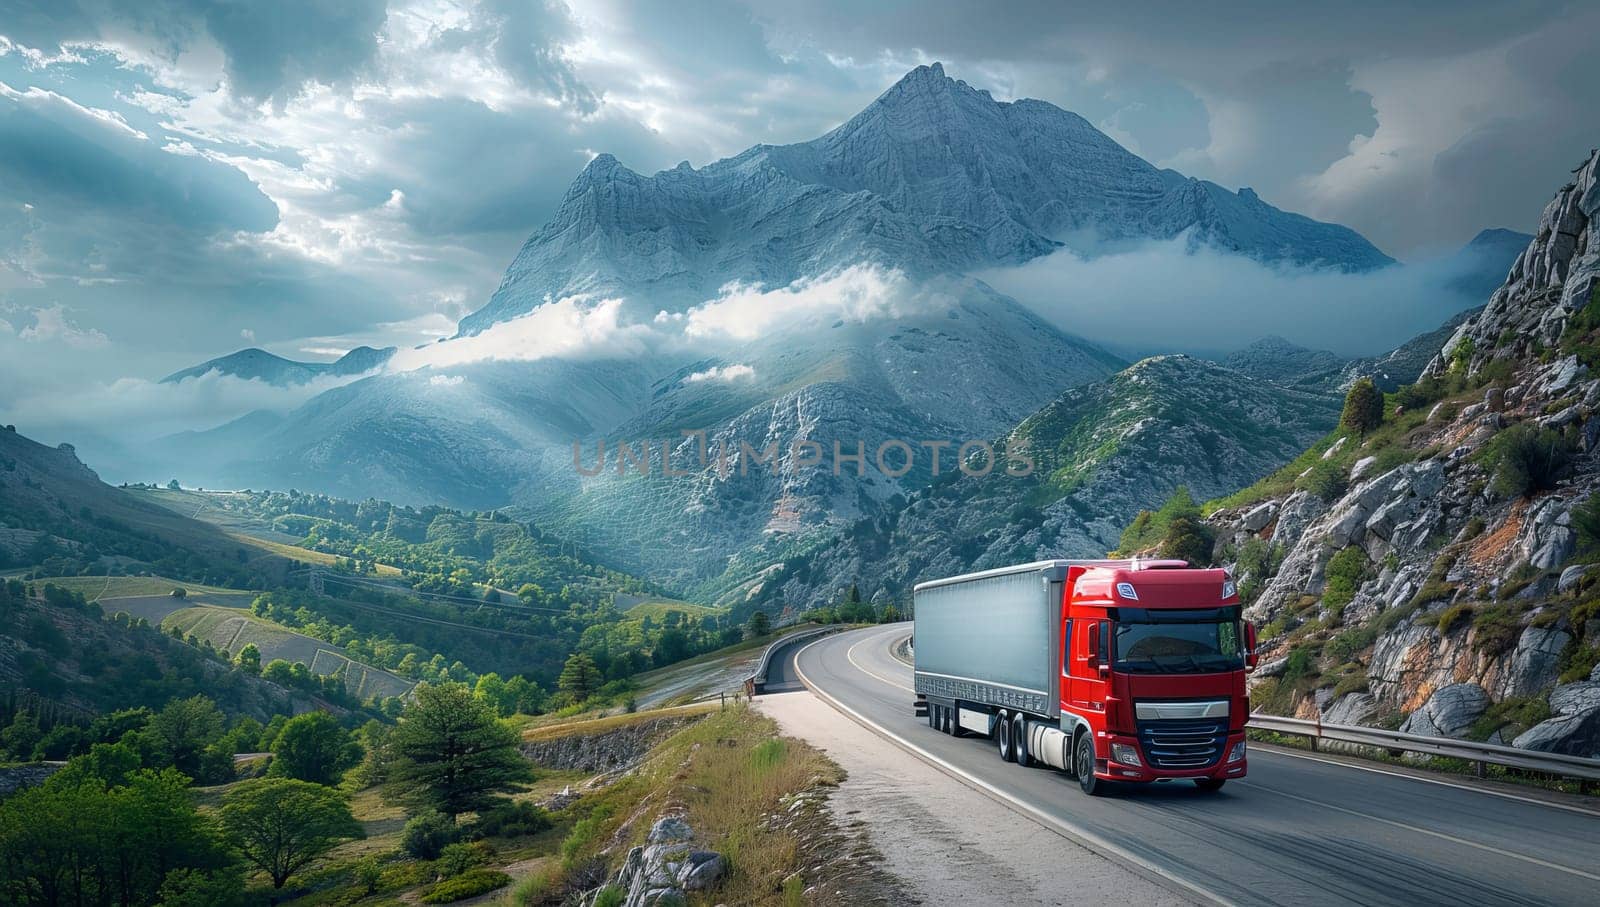 Truck on the road in the mountains.